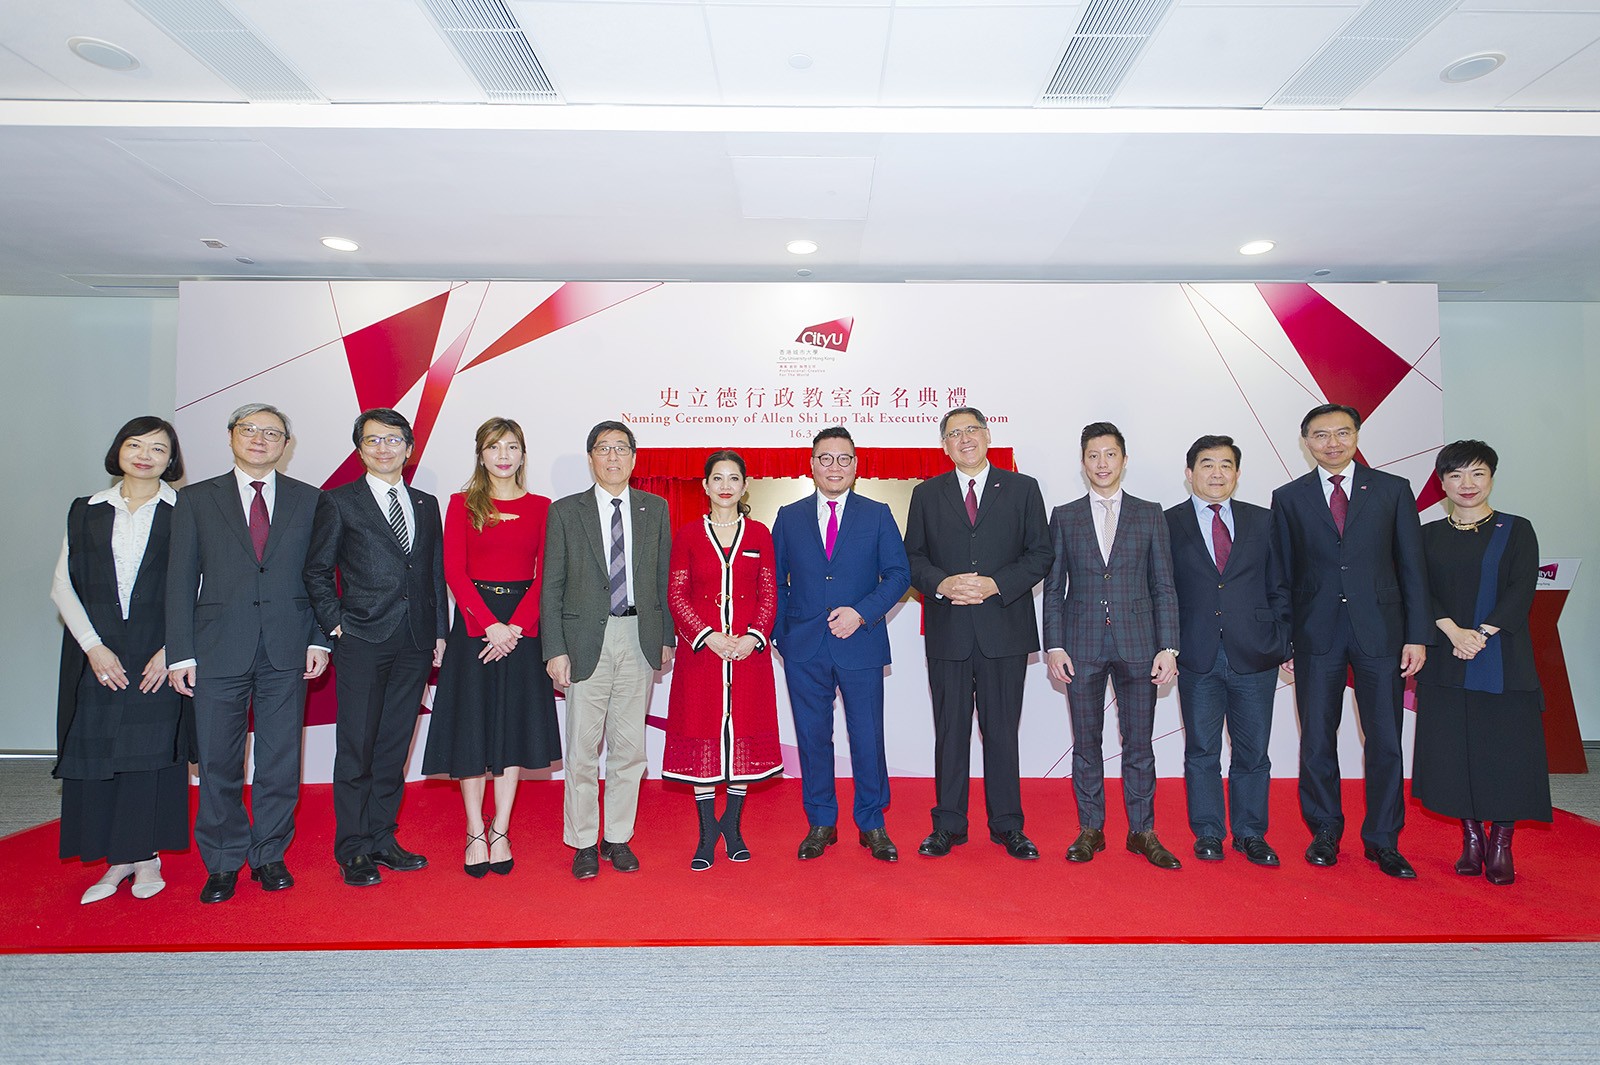 Dr Shi (6th from right) and his family members, Mr Huang (5th from right), Professor Kuo (5th from left) and CityU senior management, attended the naming ceremony. 